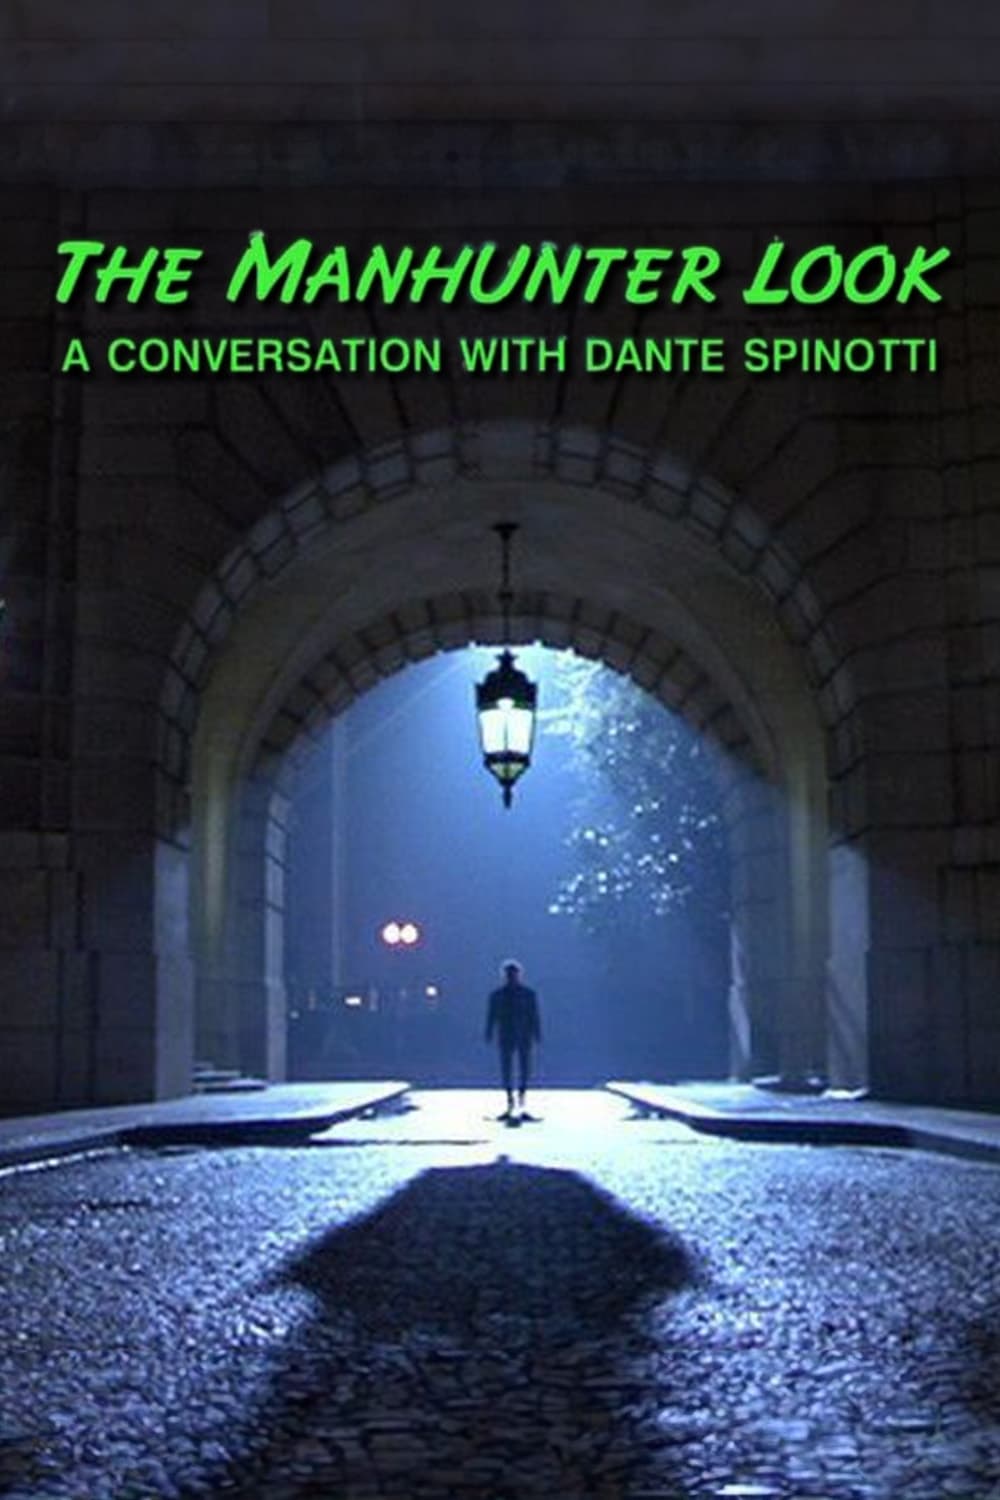 The 'Manhunter' Look: A Conversation with Dante Spinotti